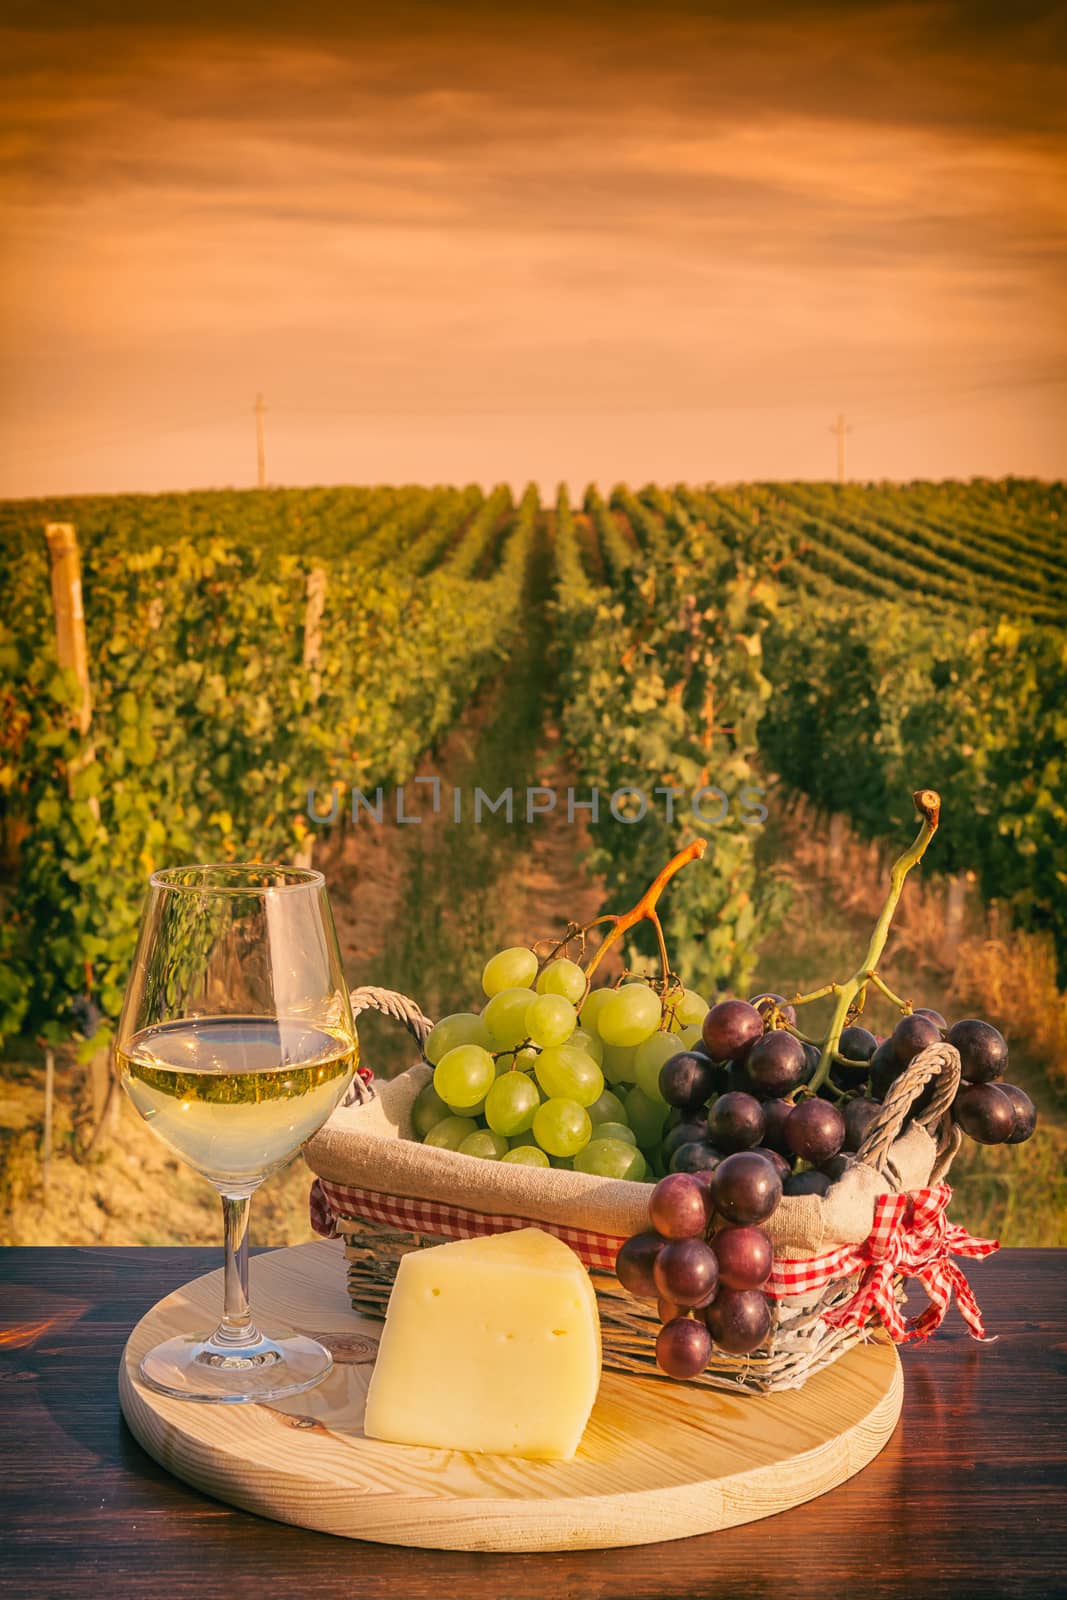 Glass of white wine in front of a vineyard at sunset by LuigiMorbidelli